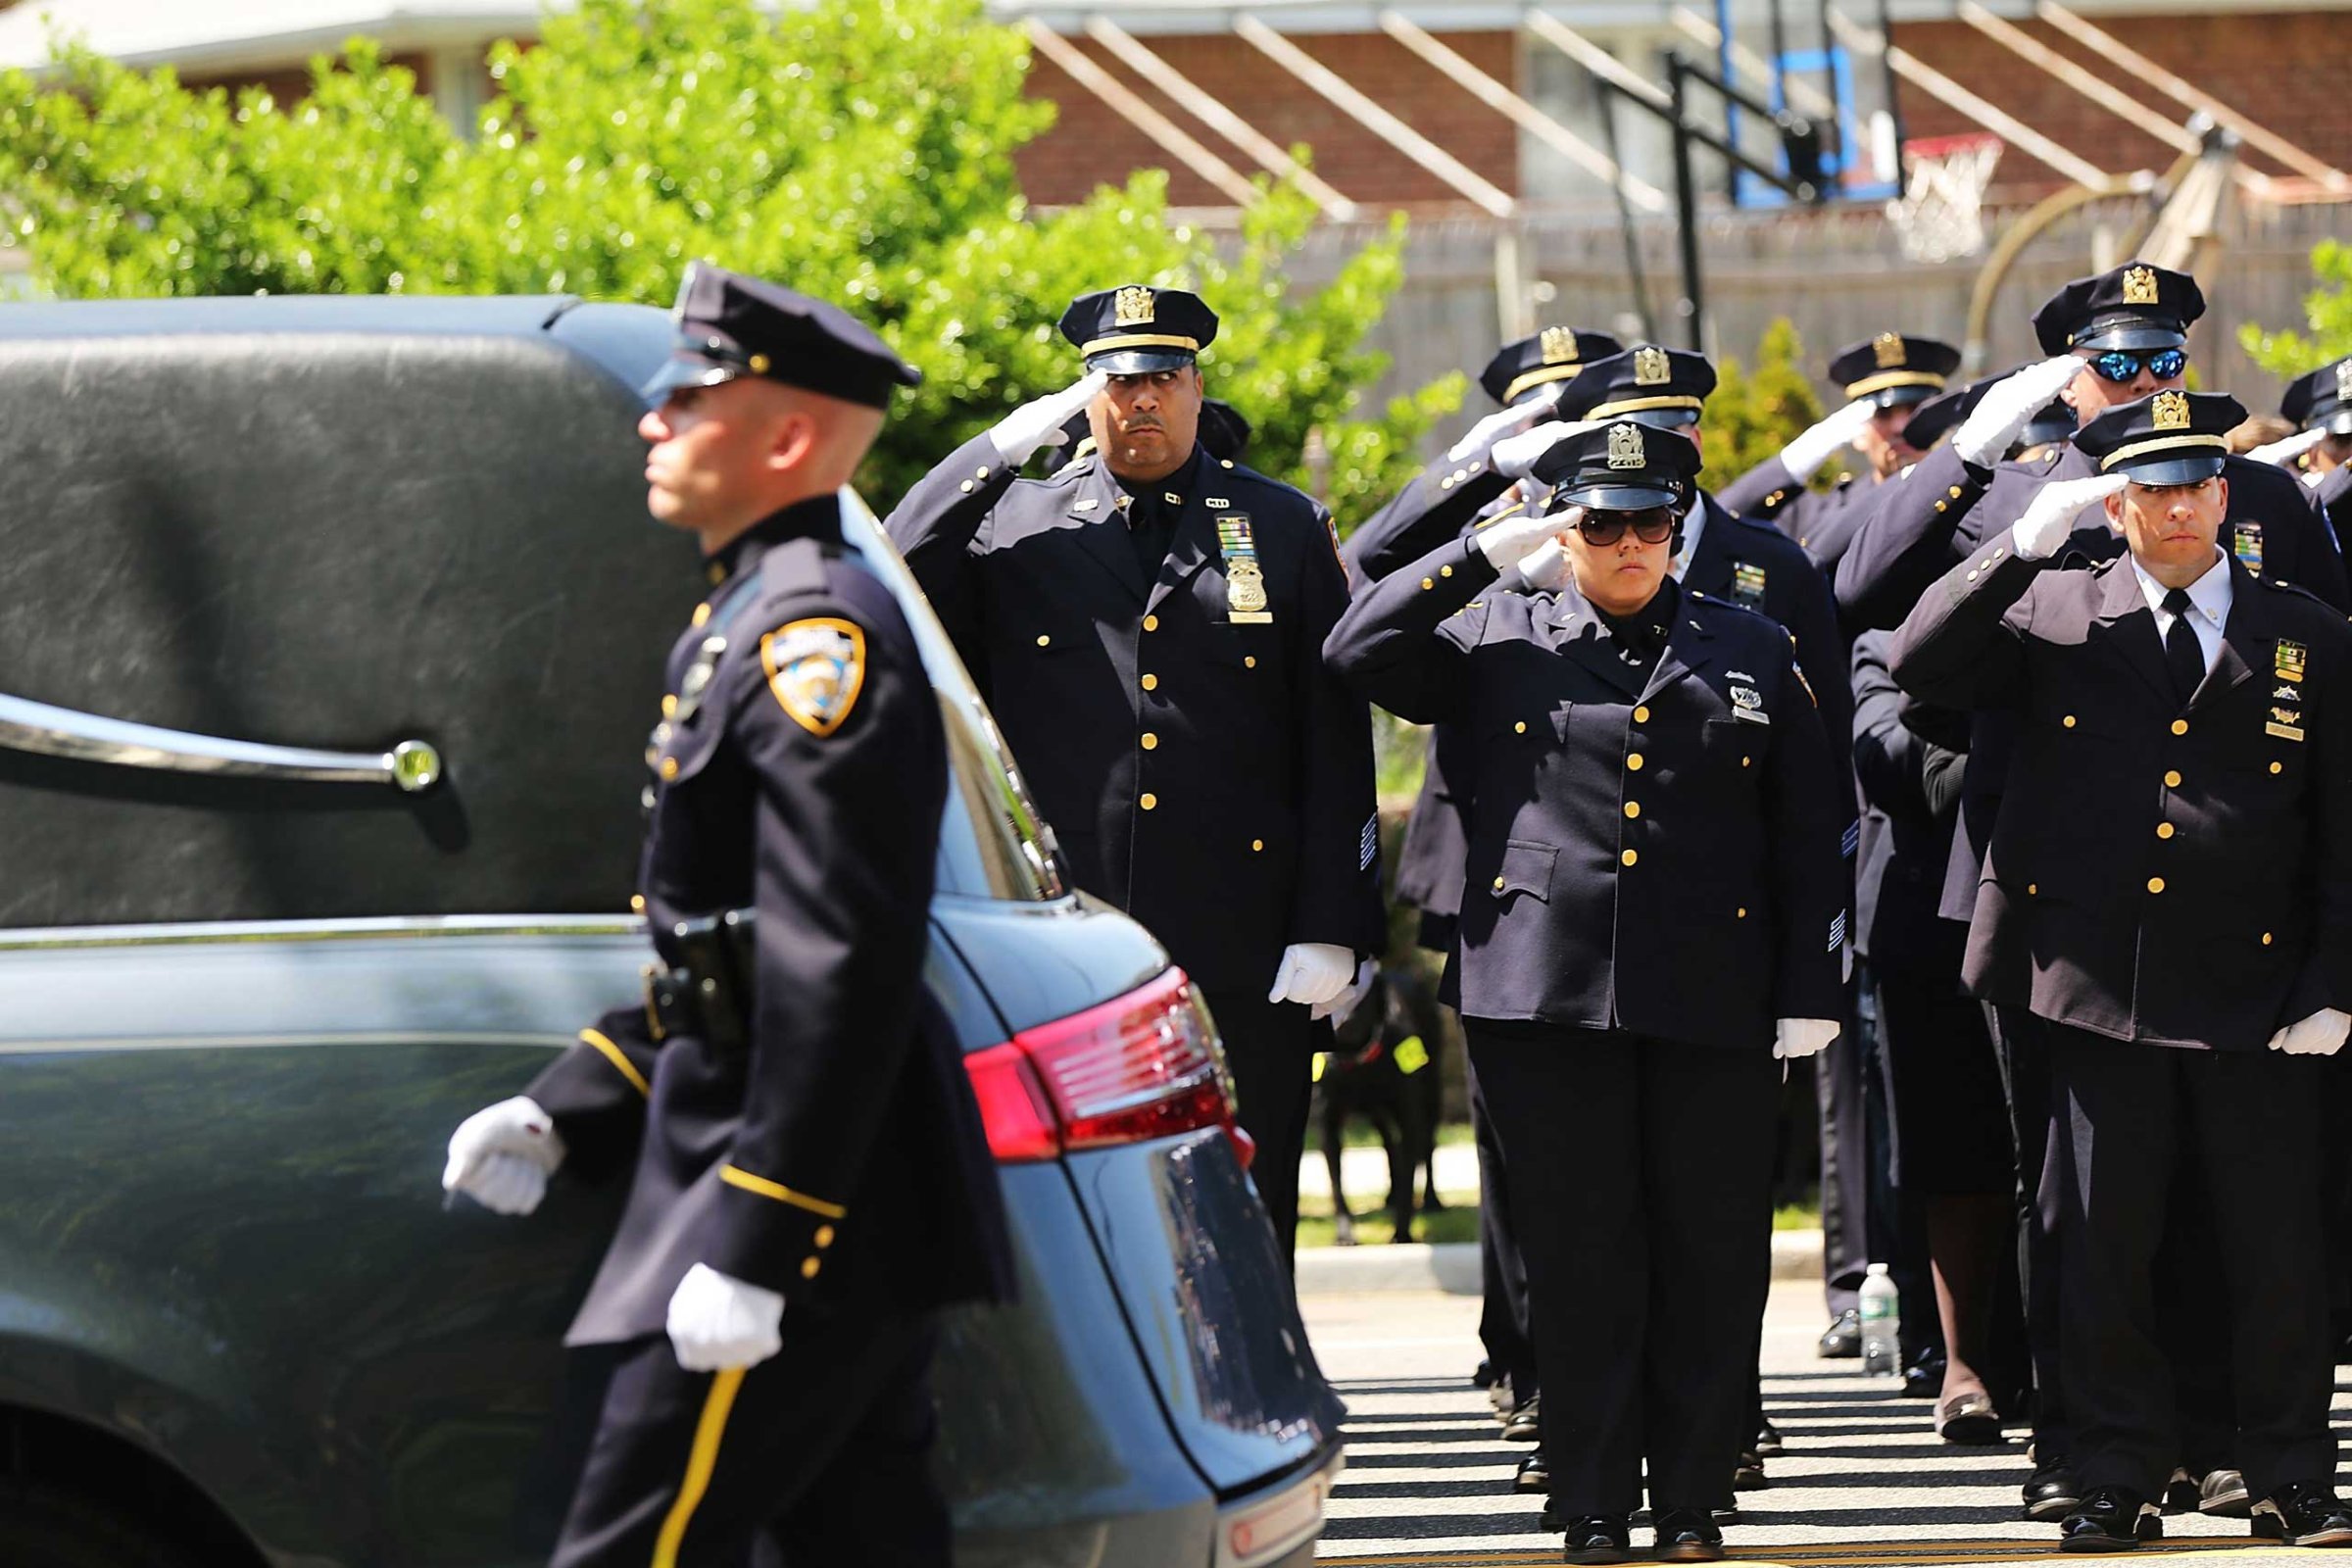 Funeral Held For NYPD Officer Brian Moore Fatally Shot On Duty